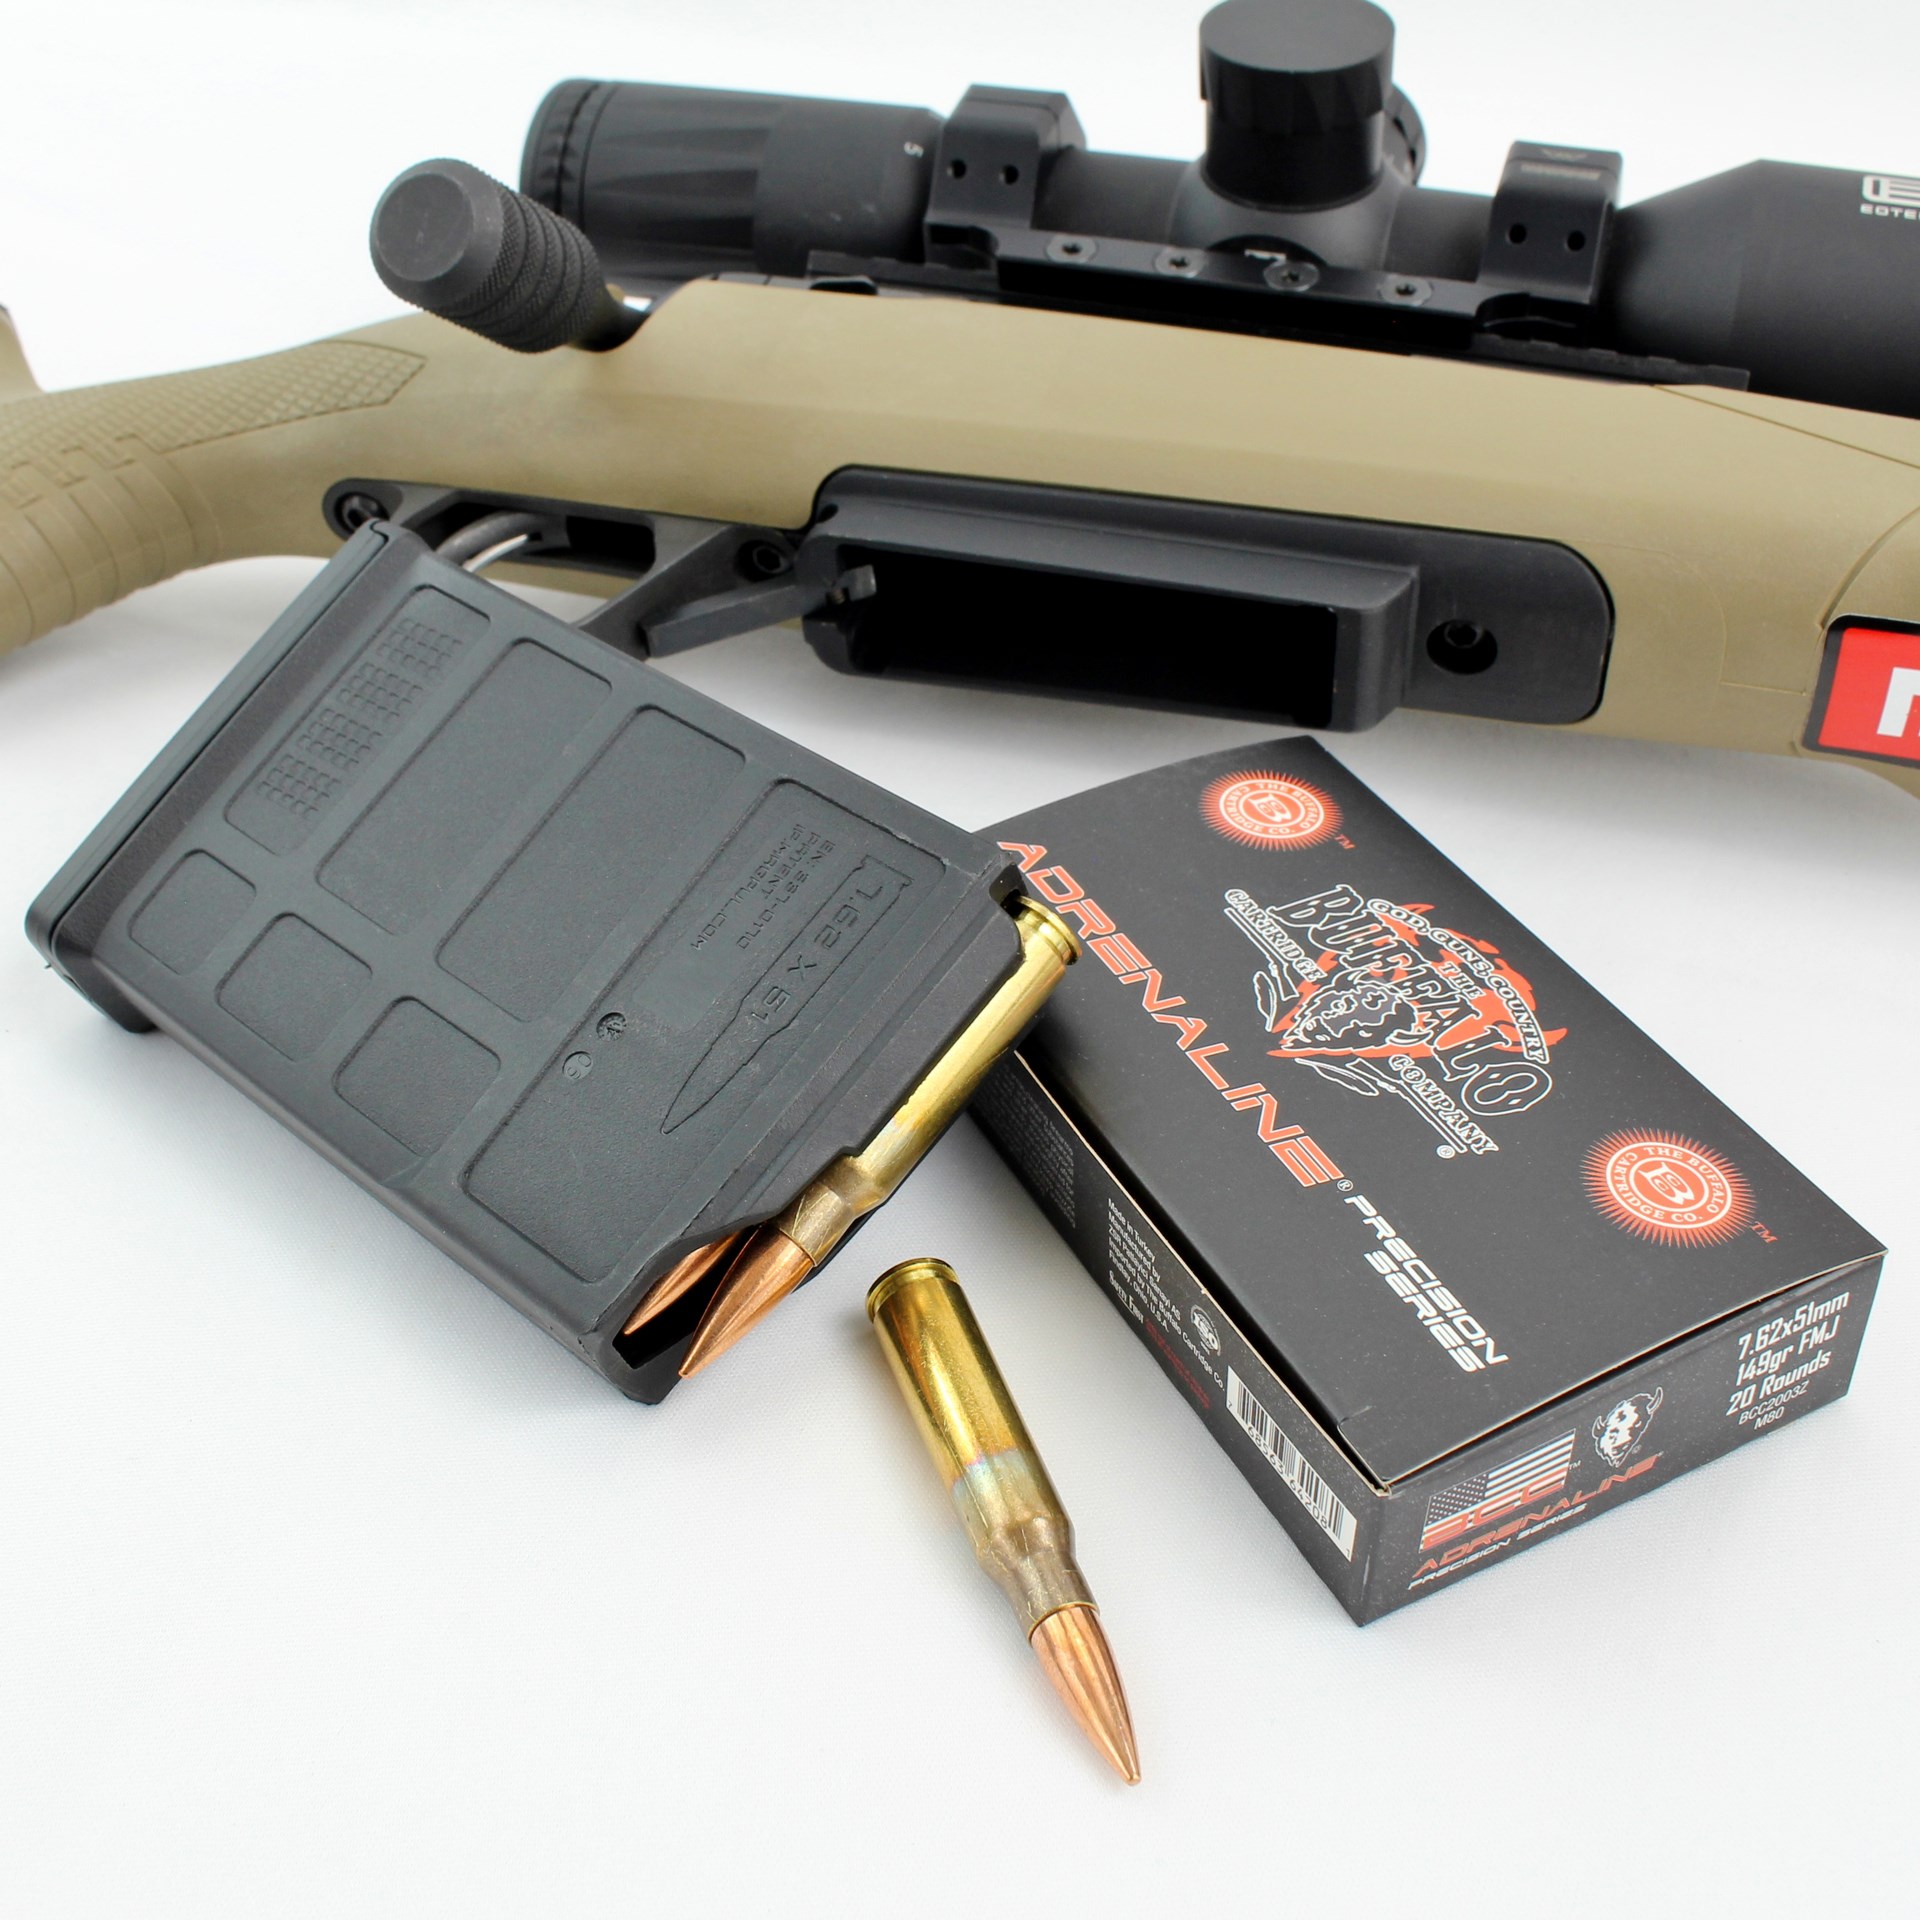 Savage 110 Carbon tactical fde bolt-action rifle with magazine and ammunition